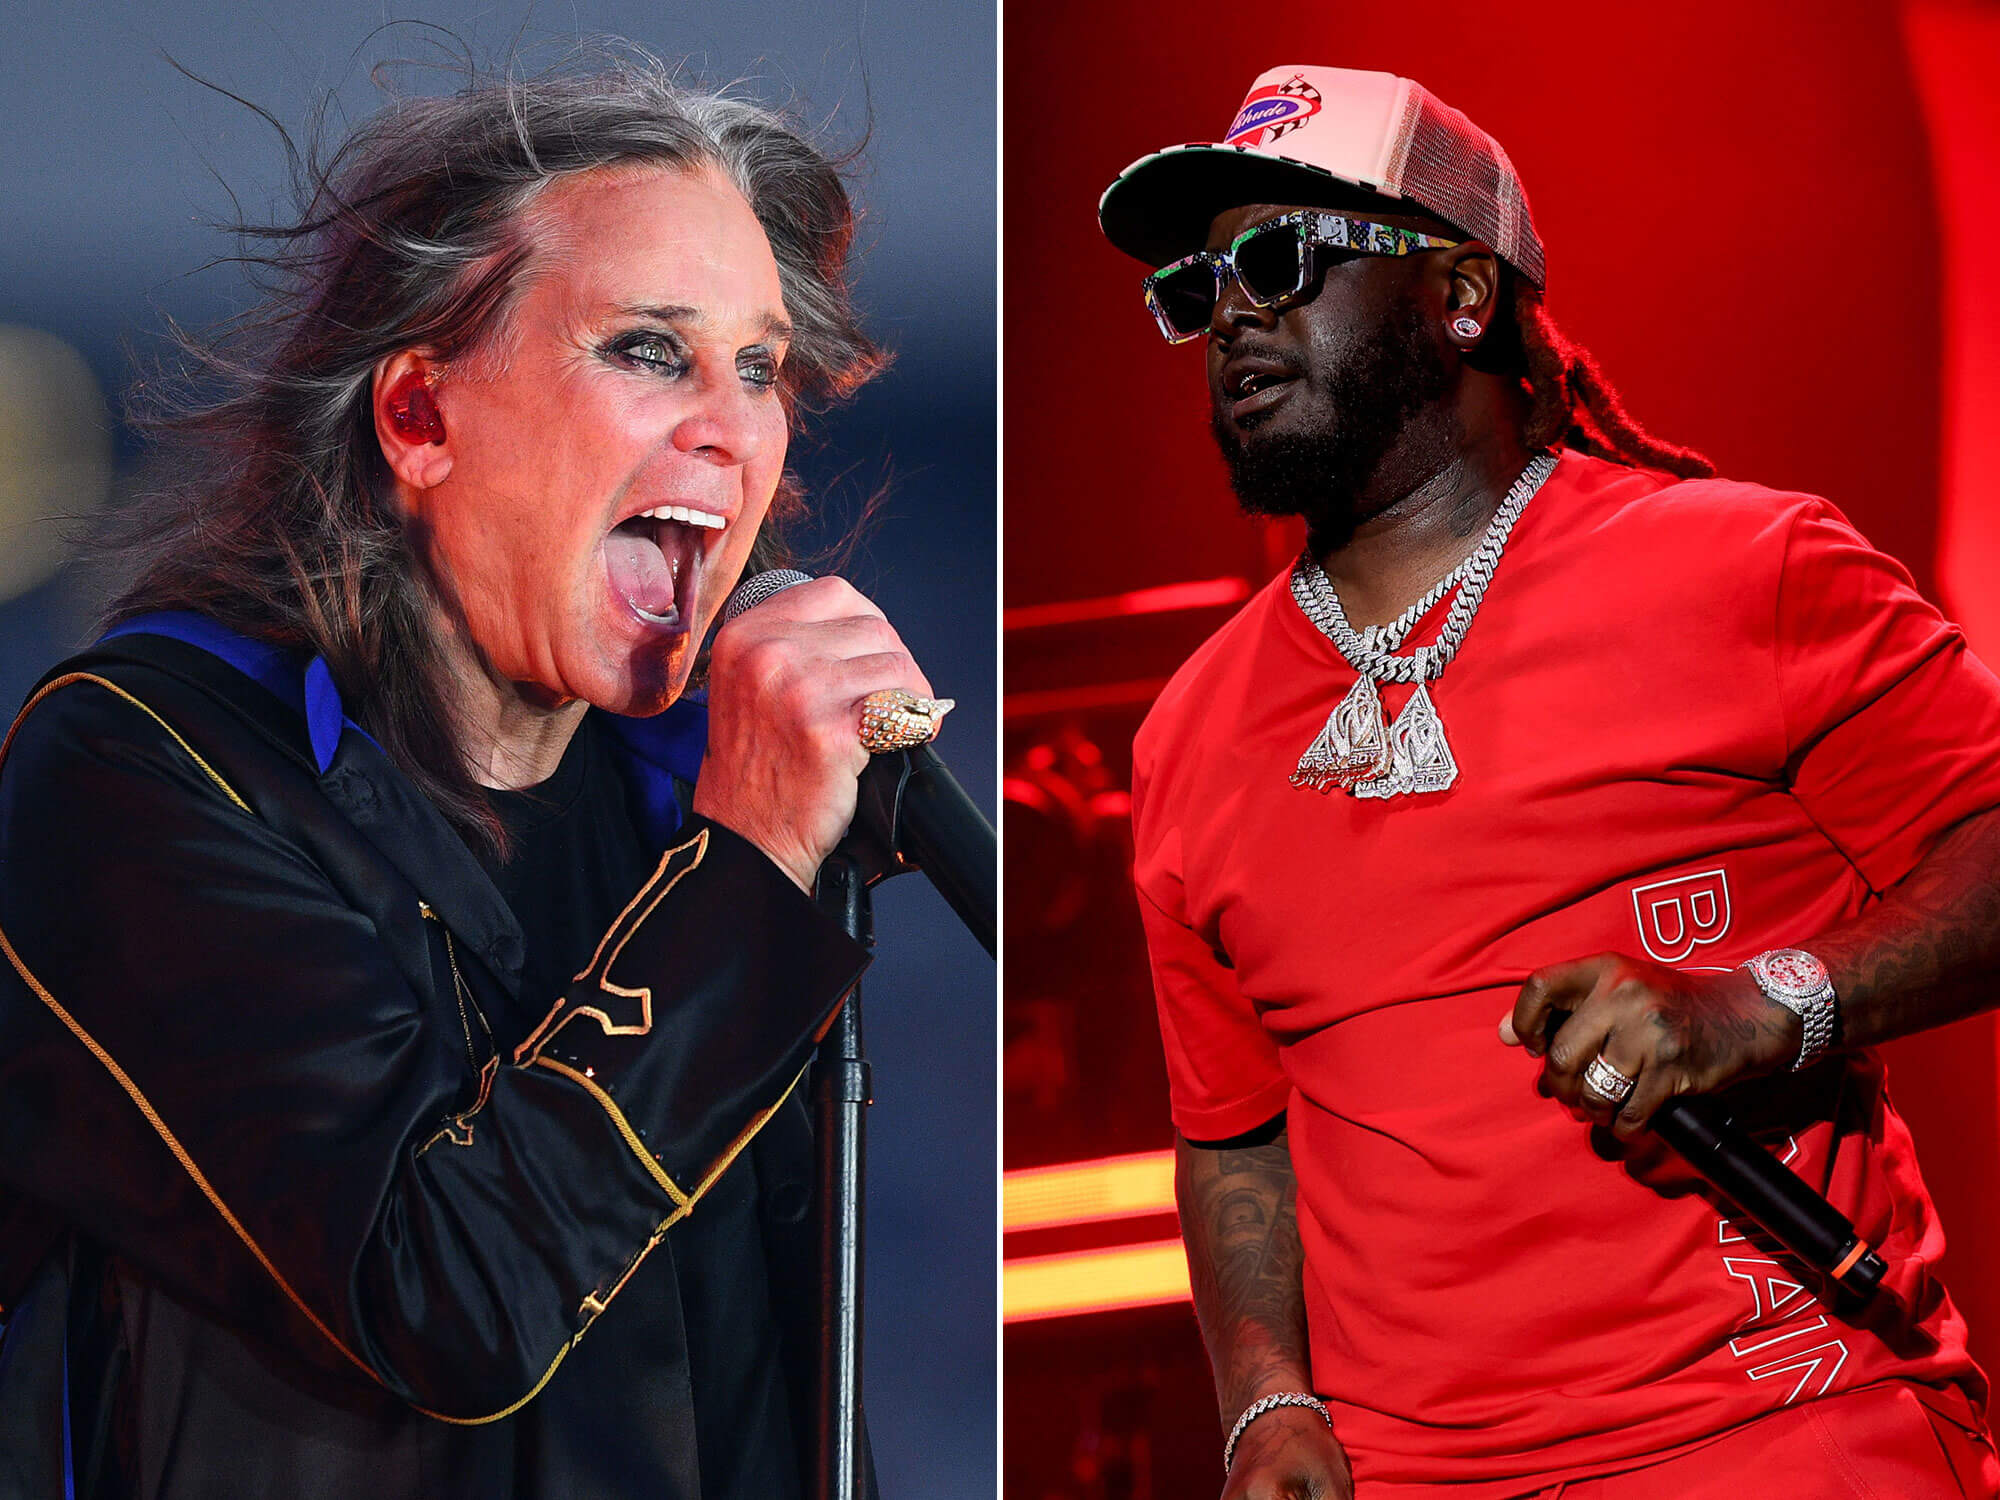 [L-R] Ozzy Osbourne and T-Pain